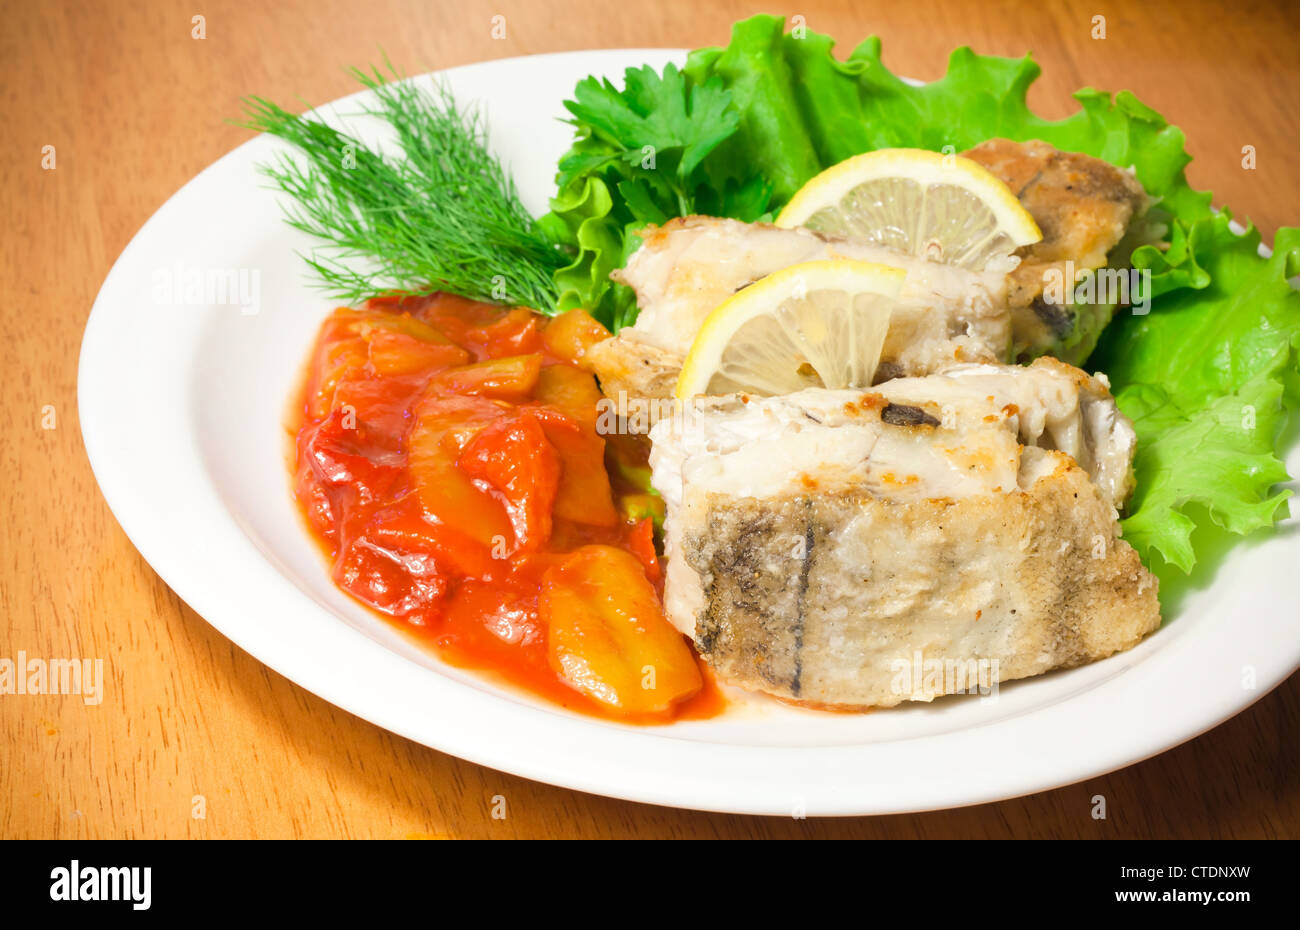 Fried haddock fish with vegetables and greens on white plate Stock Photo